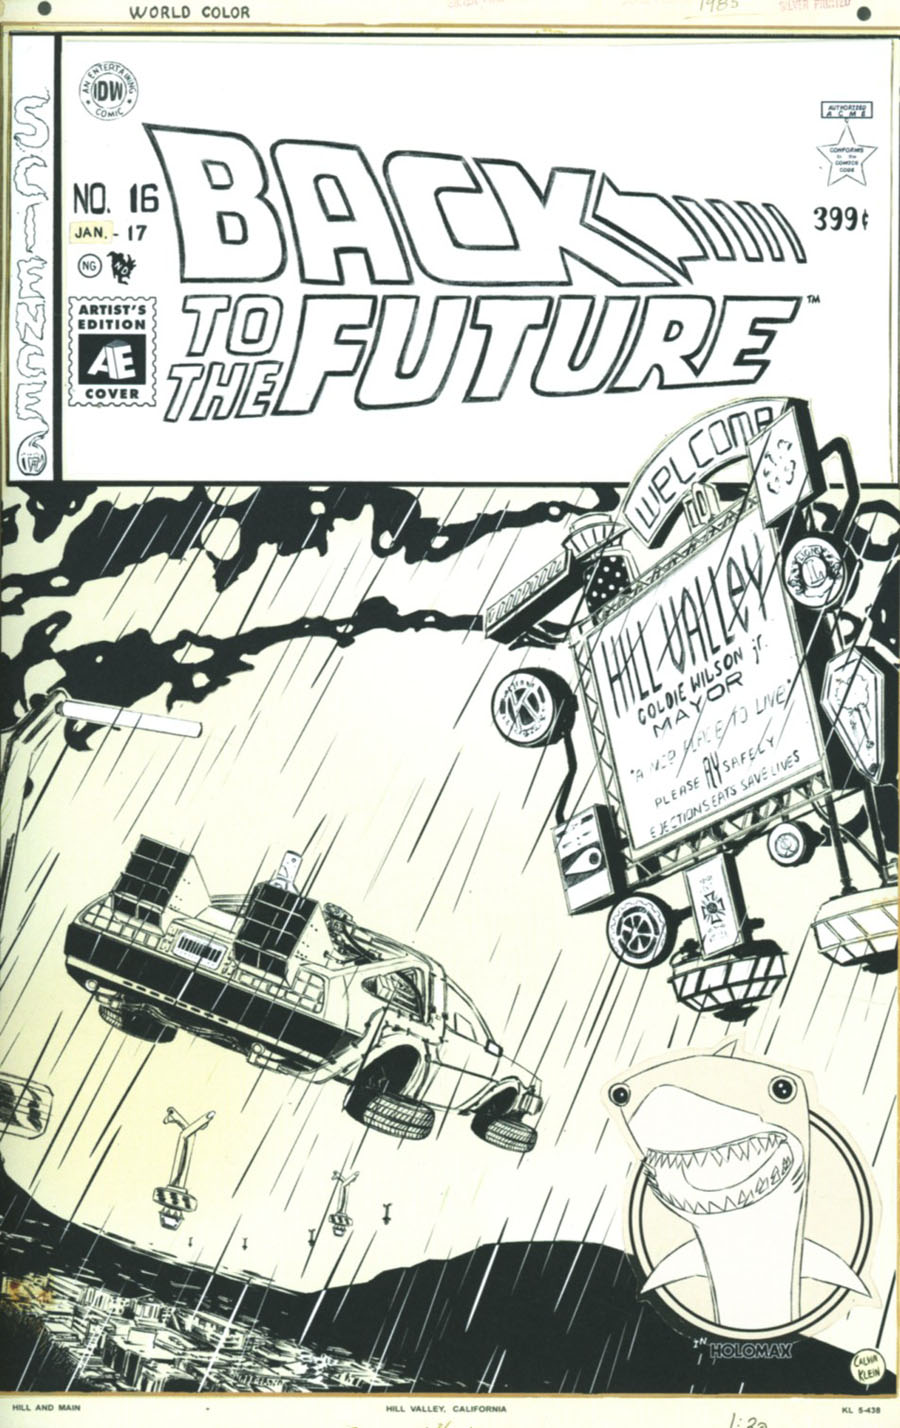 Back To The Future Vol 2 #16 Cover B Variant Dan Schoening Artists Edition Cover